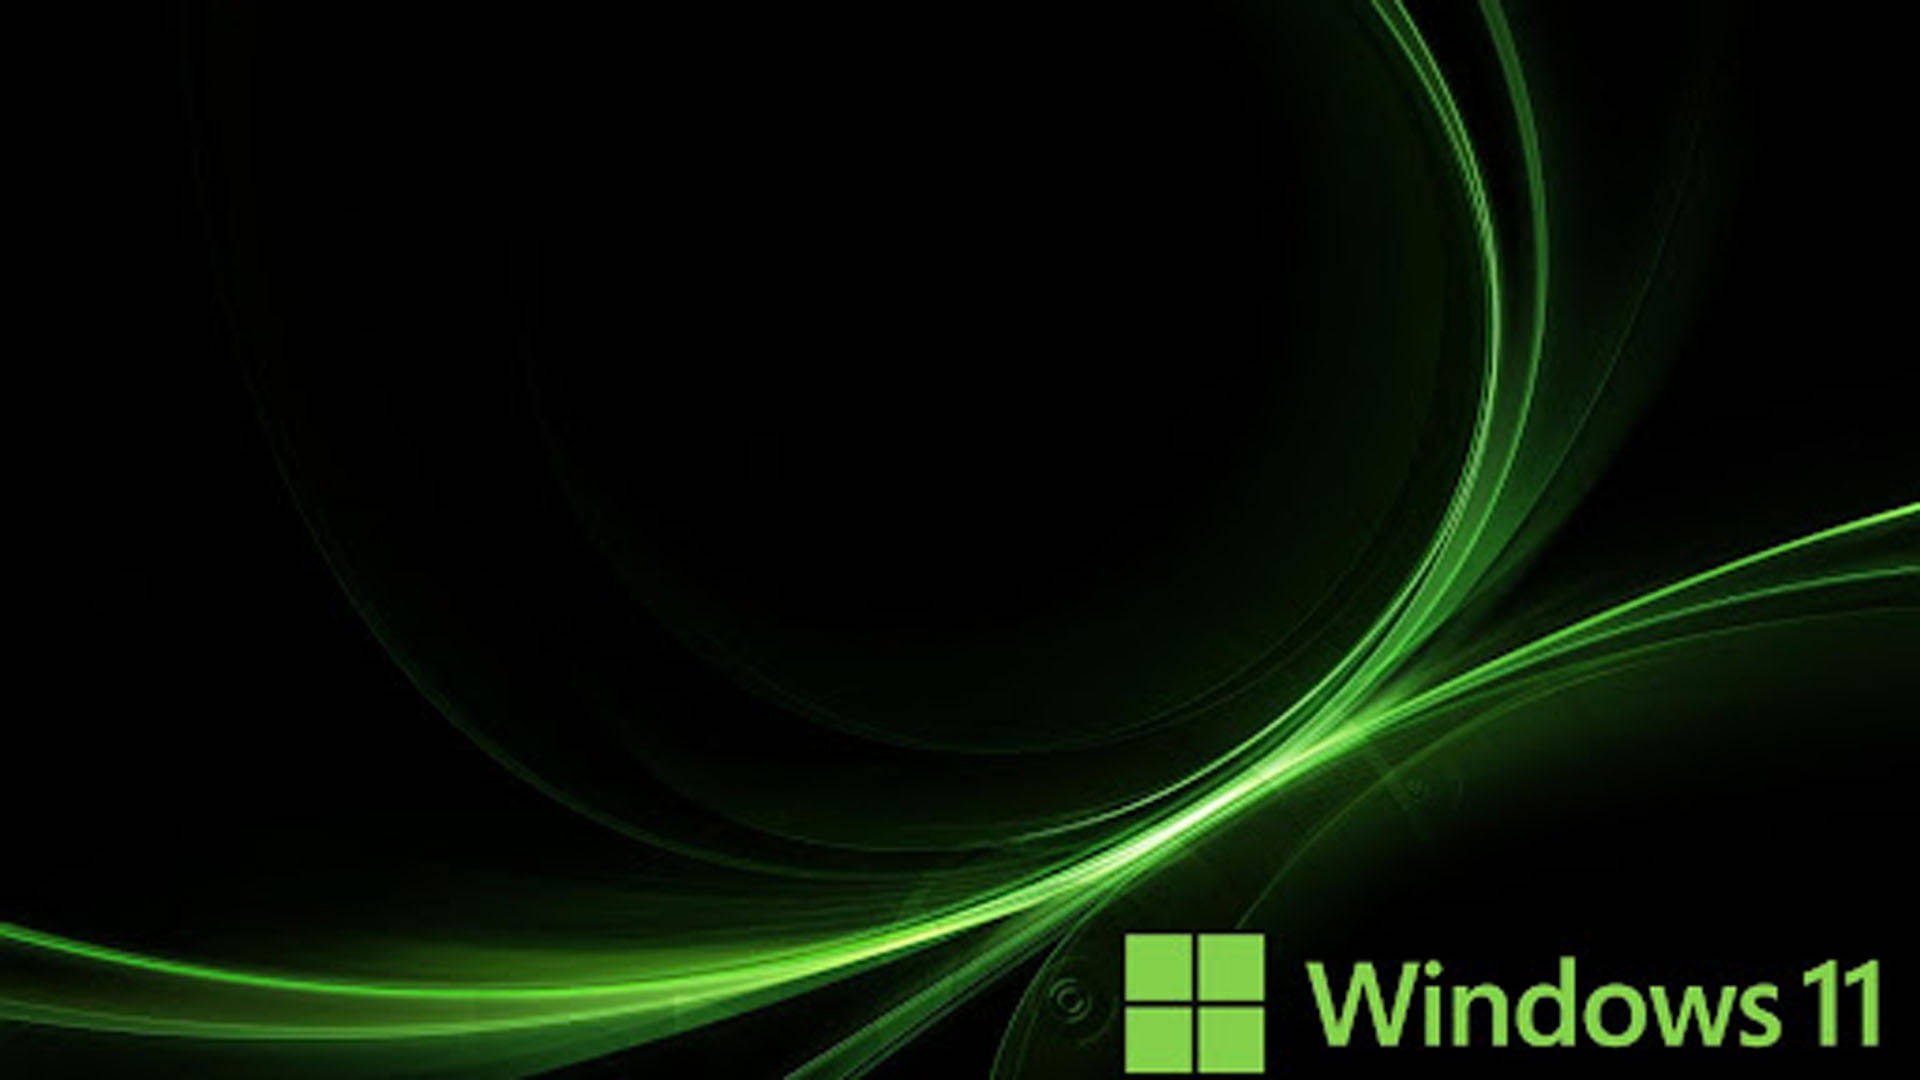 Black And Green Windows 11 Curves Wallpaper